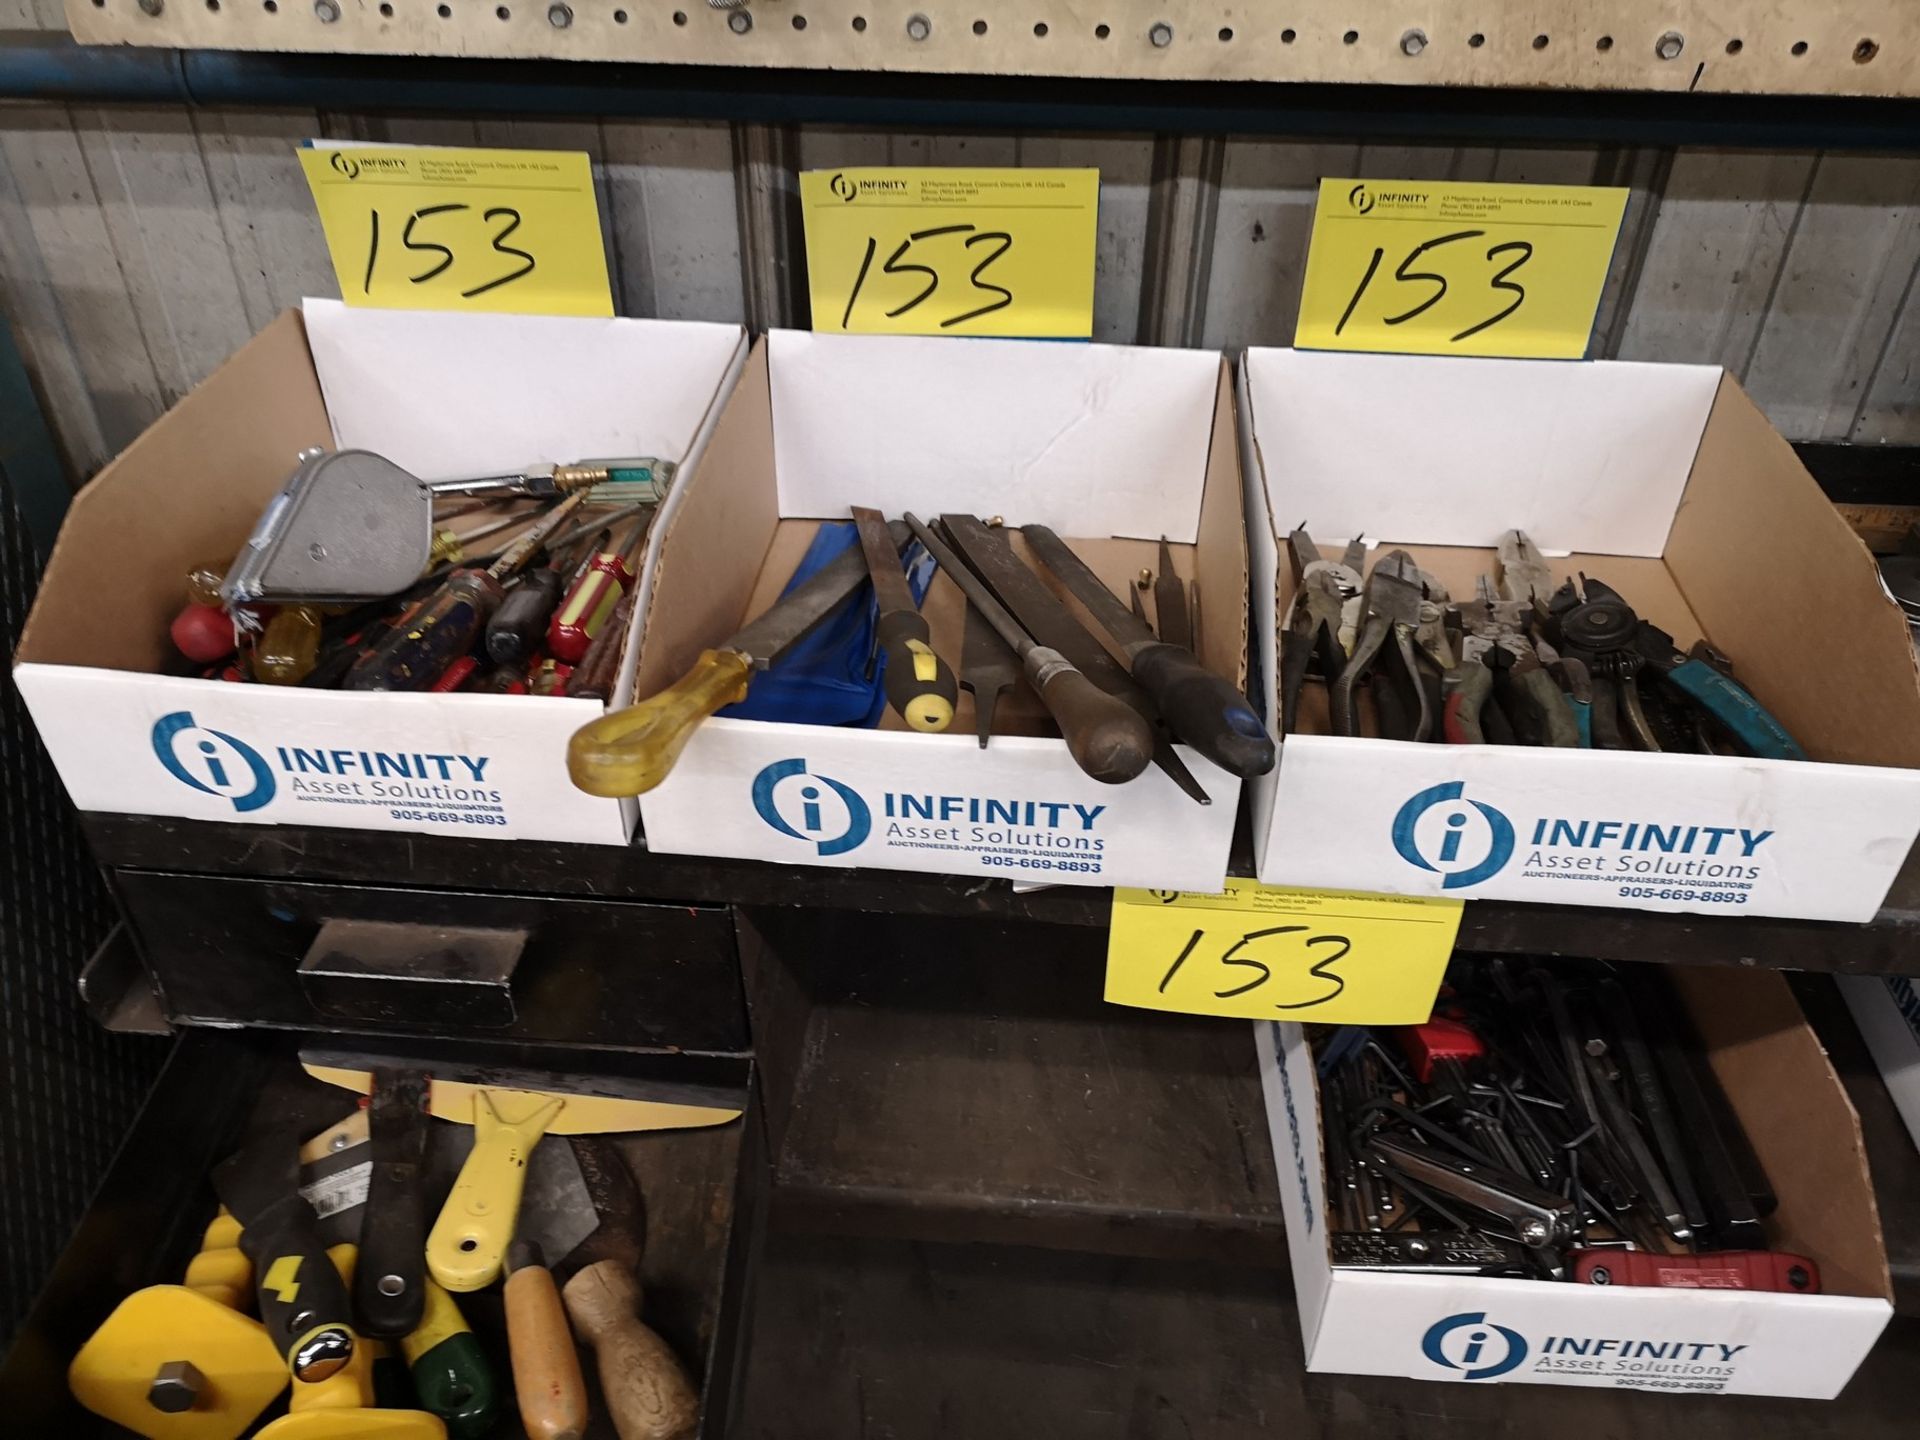 LOT OF HAND TOOLS INCL. VISE GRIPS, MEASURE TAPES, FILES, CLAMPS, SNIPERS, PLIERS,SCREWDRIVERS, - Image 3 of 4